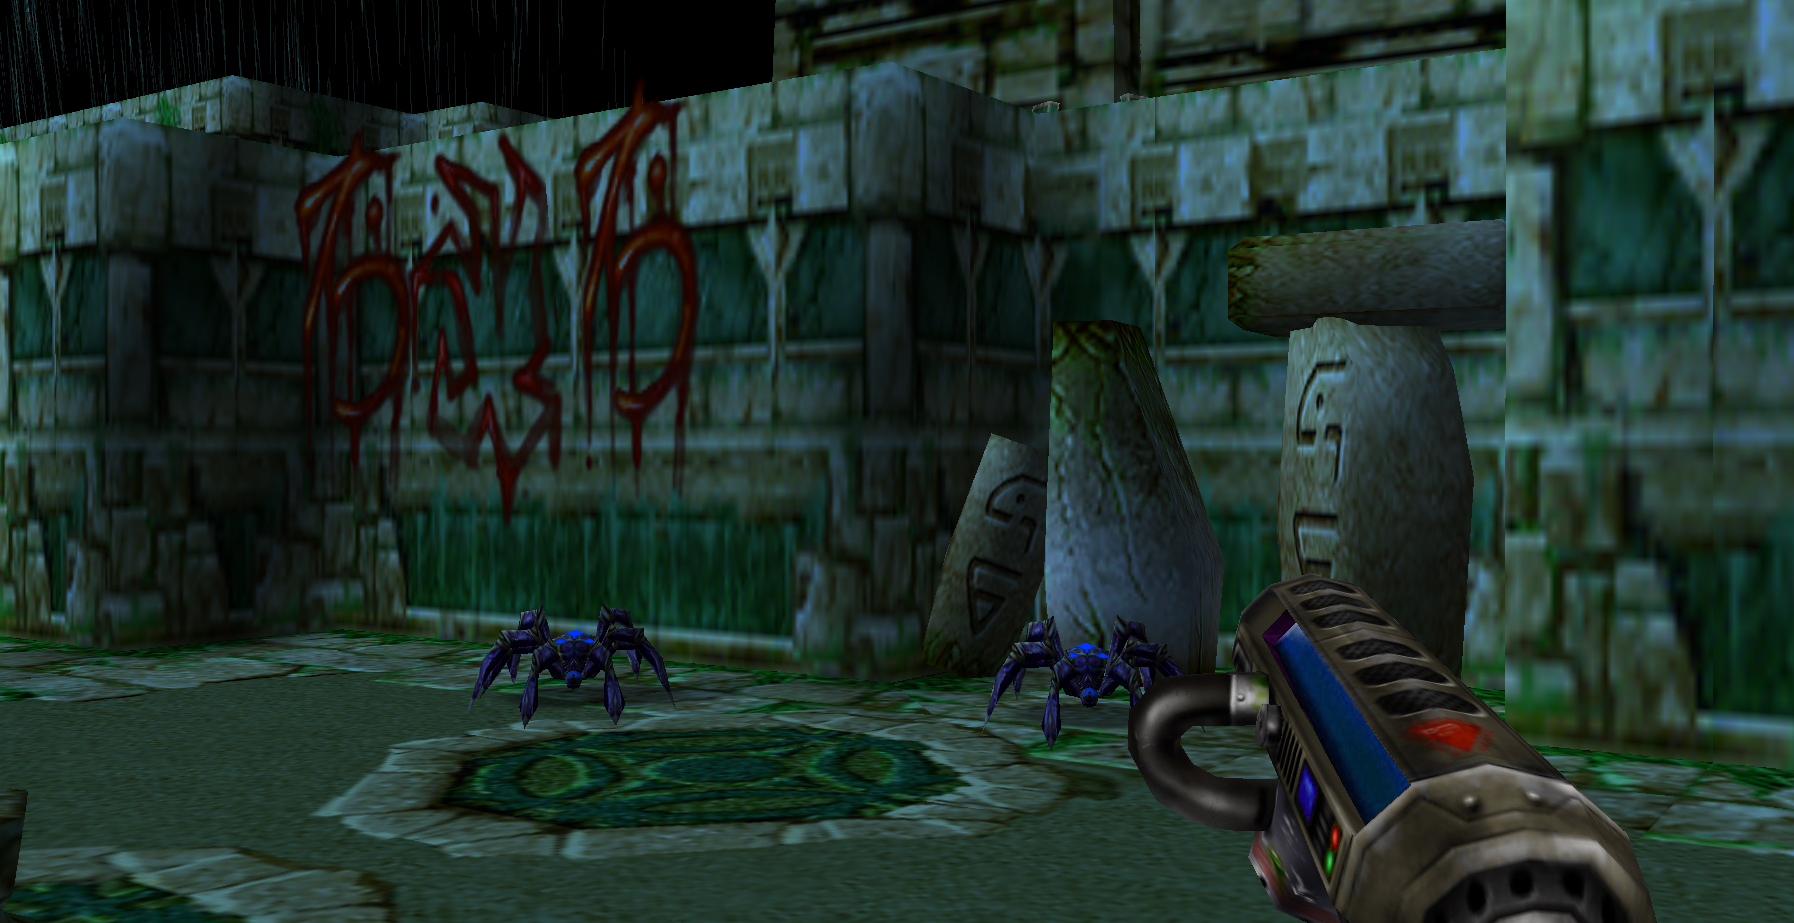 First Person WC3 Shooter Screenshot Mockup - Widdle Spiders inside the Alien Temple World's Temple Complex Interior